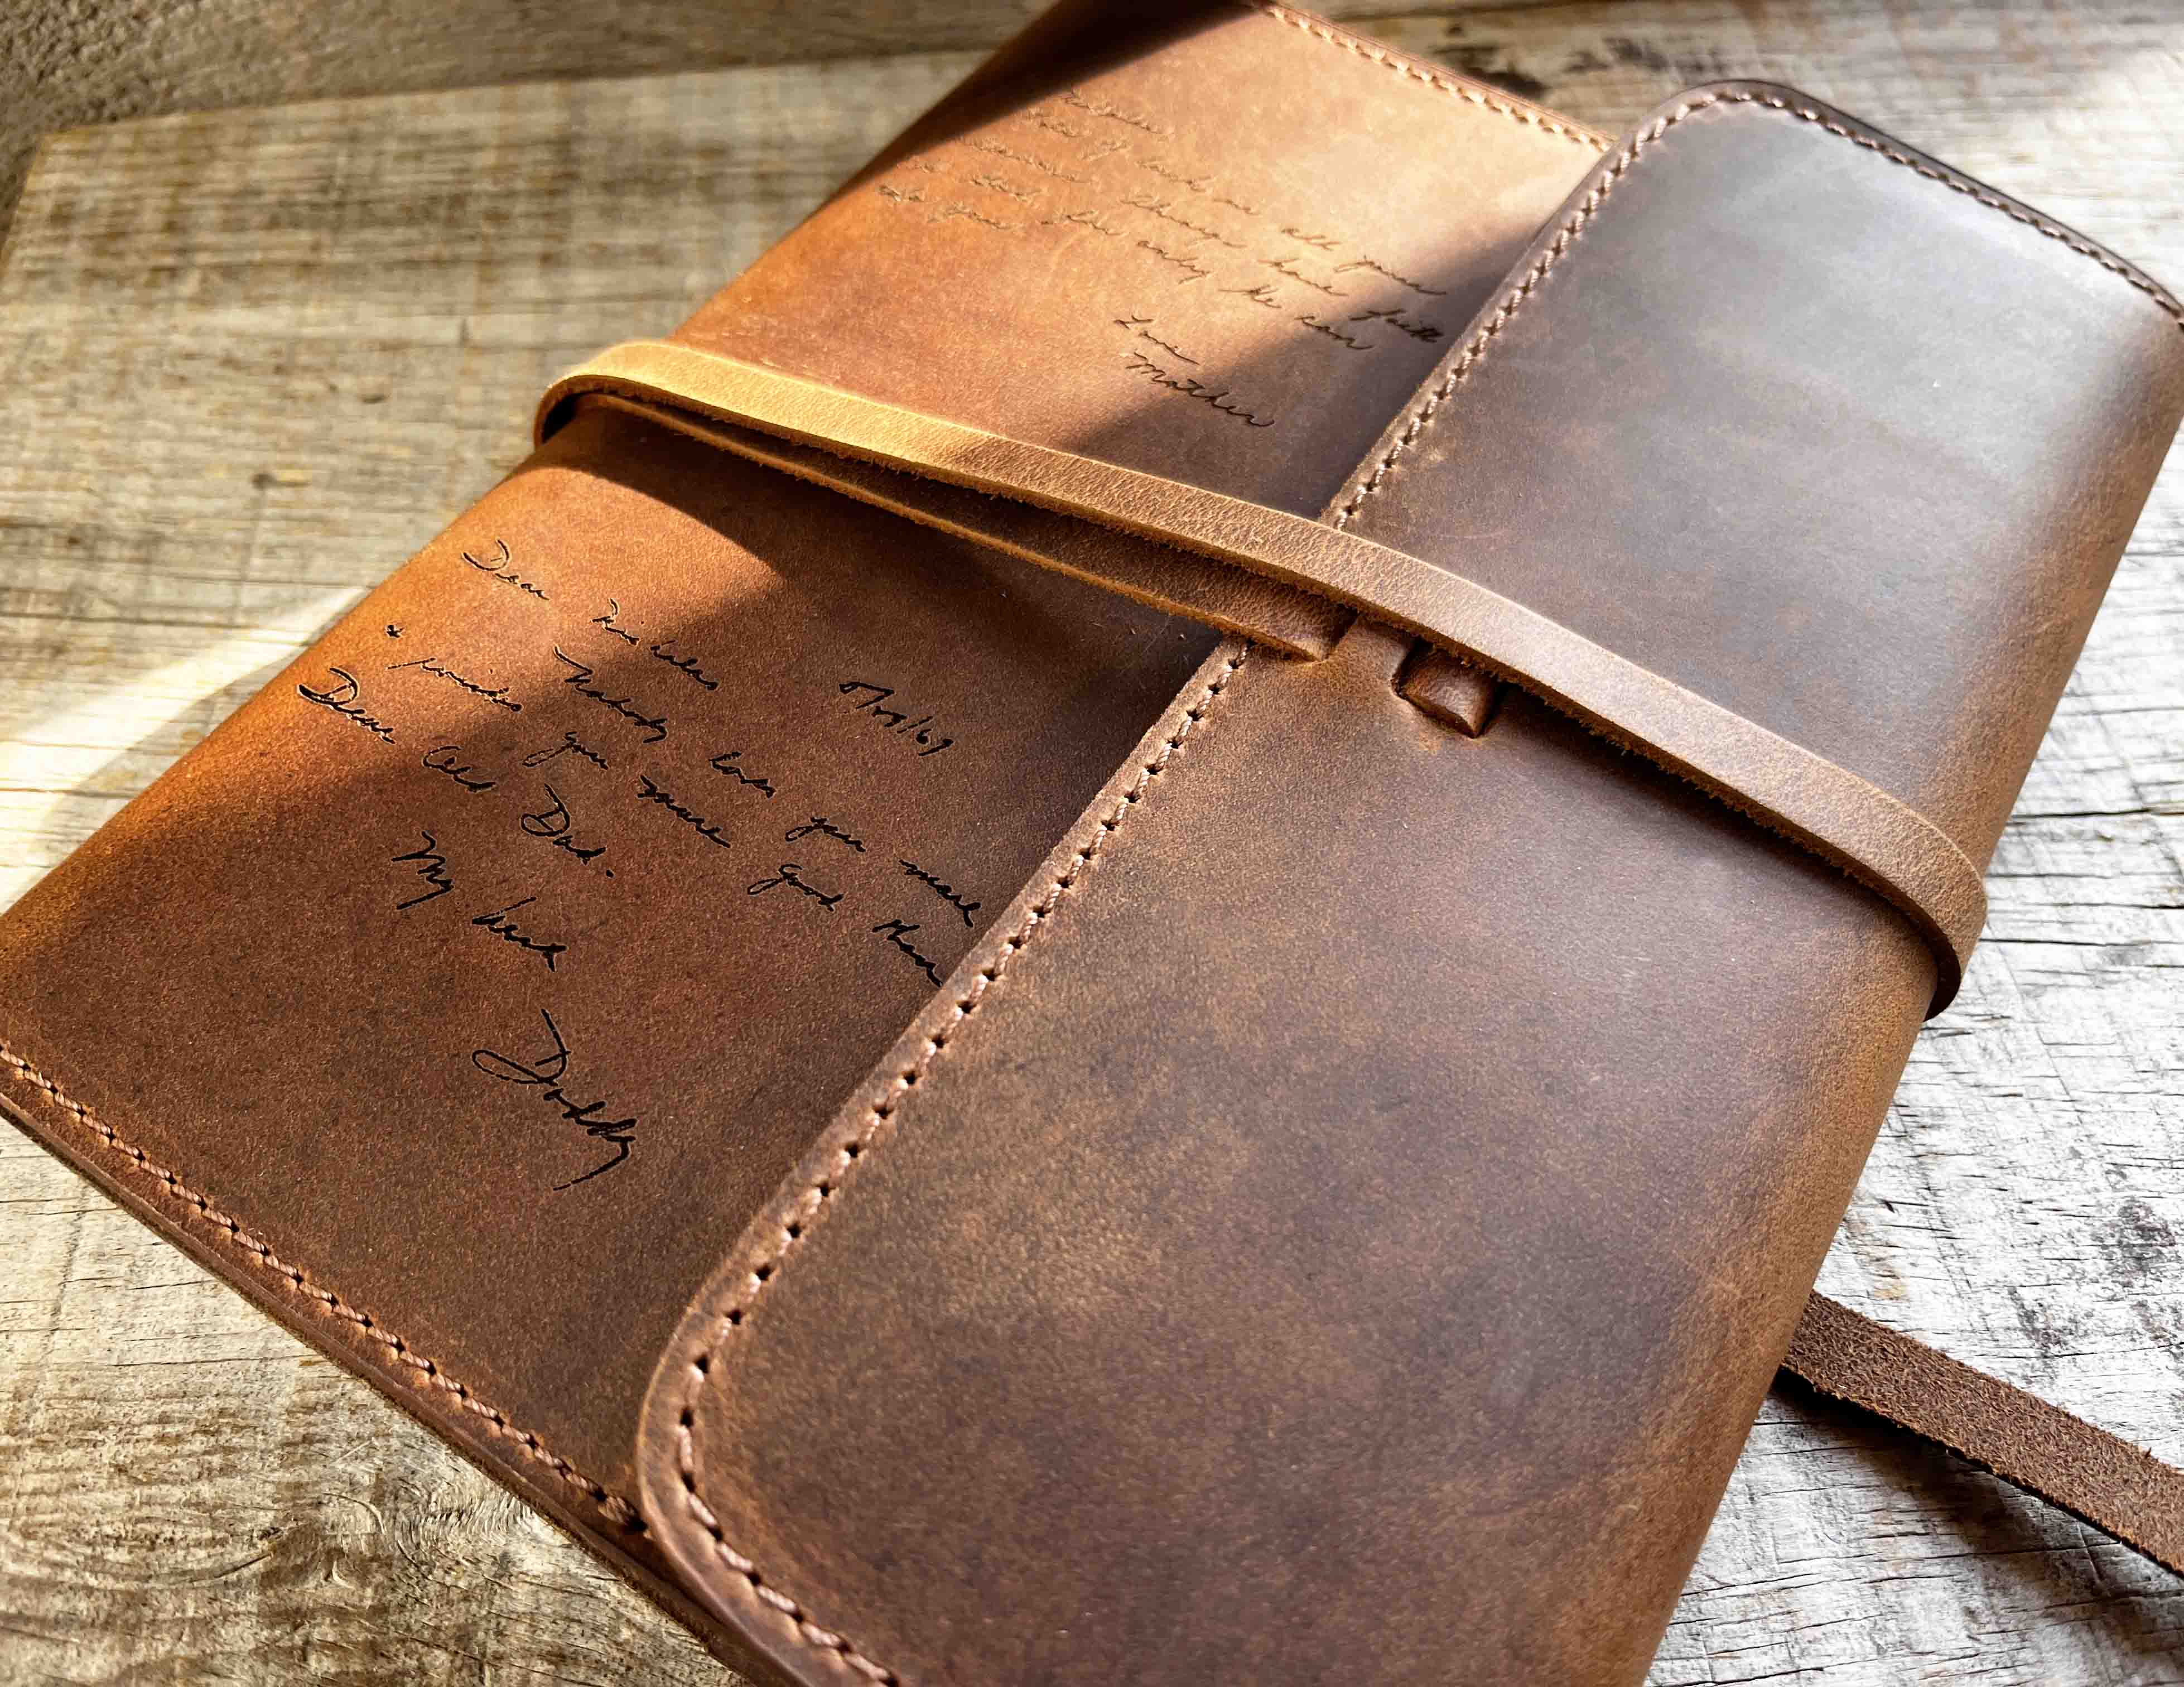 Handwriting Engraved Leather Journal